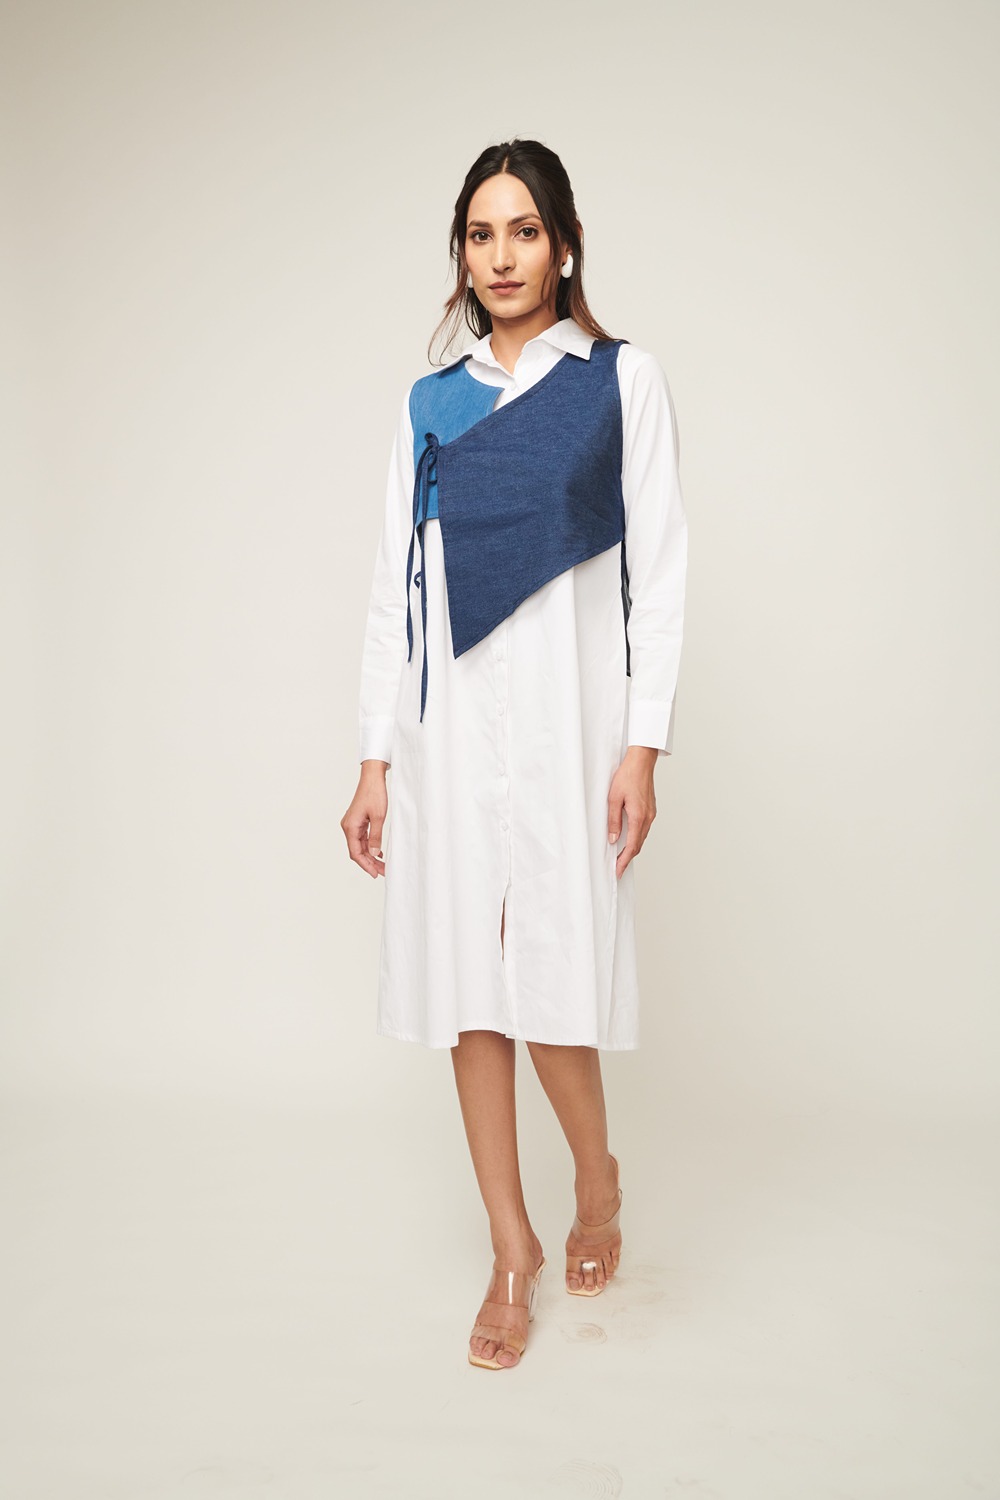 Weaving Cult White Shirt Dress With Cropped Jacket